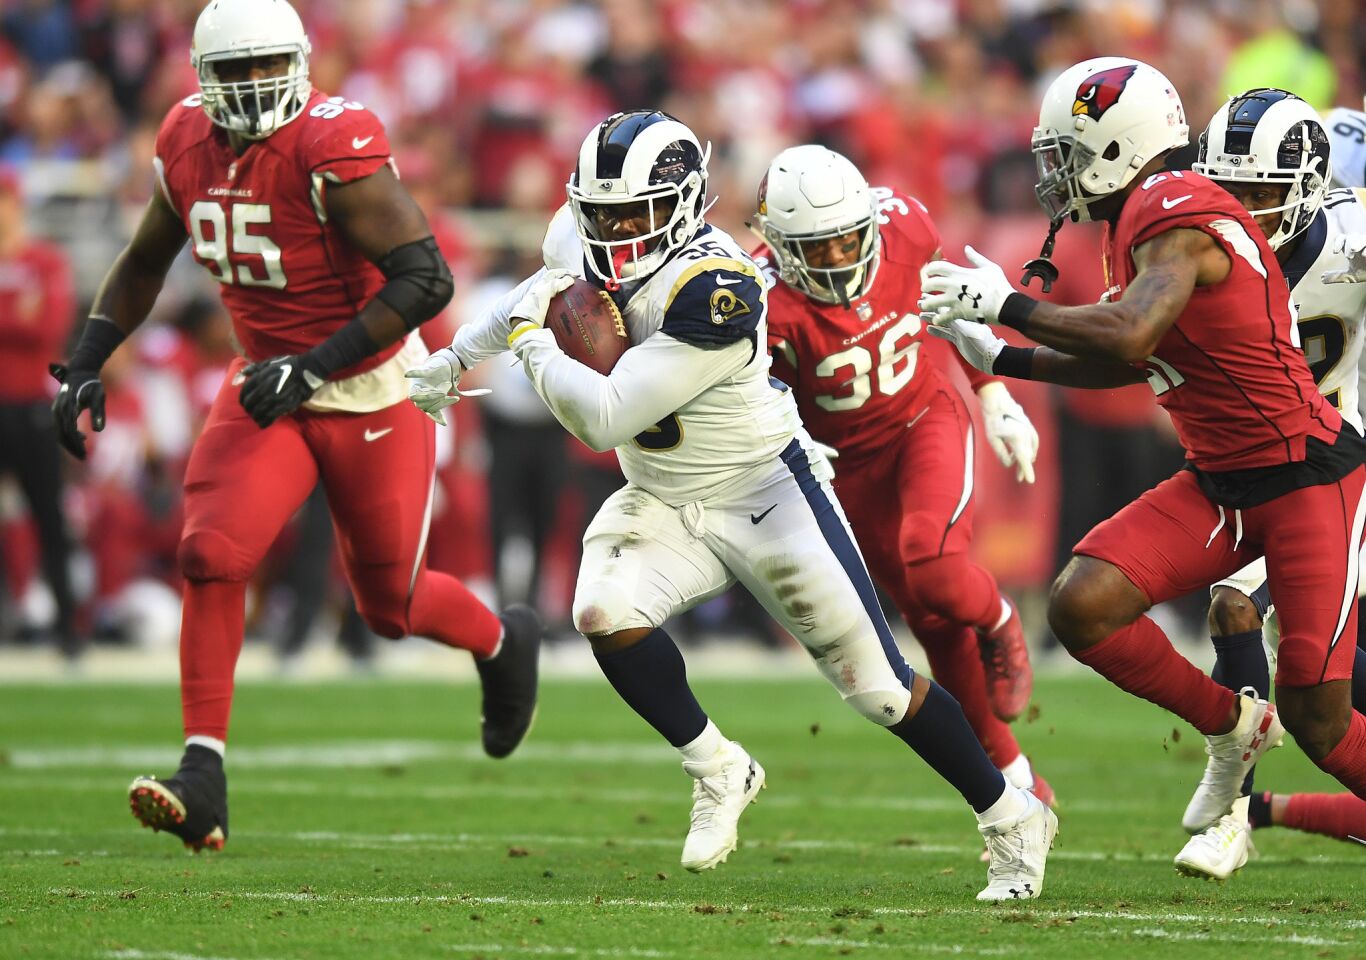 Rams running back C.J. Anderson picks up big yards against the Arizona Cardinals in the second quarter at State Farm Stadium on Sunday.